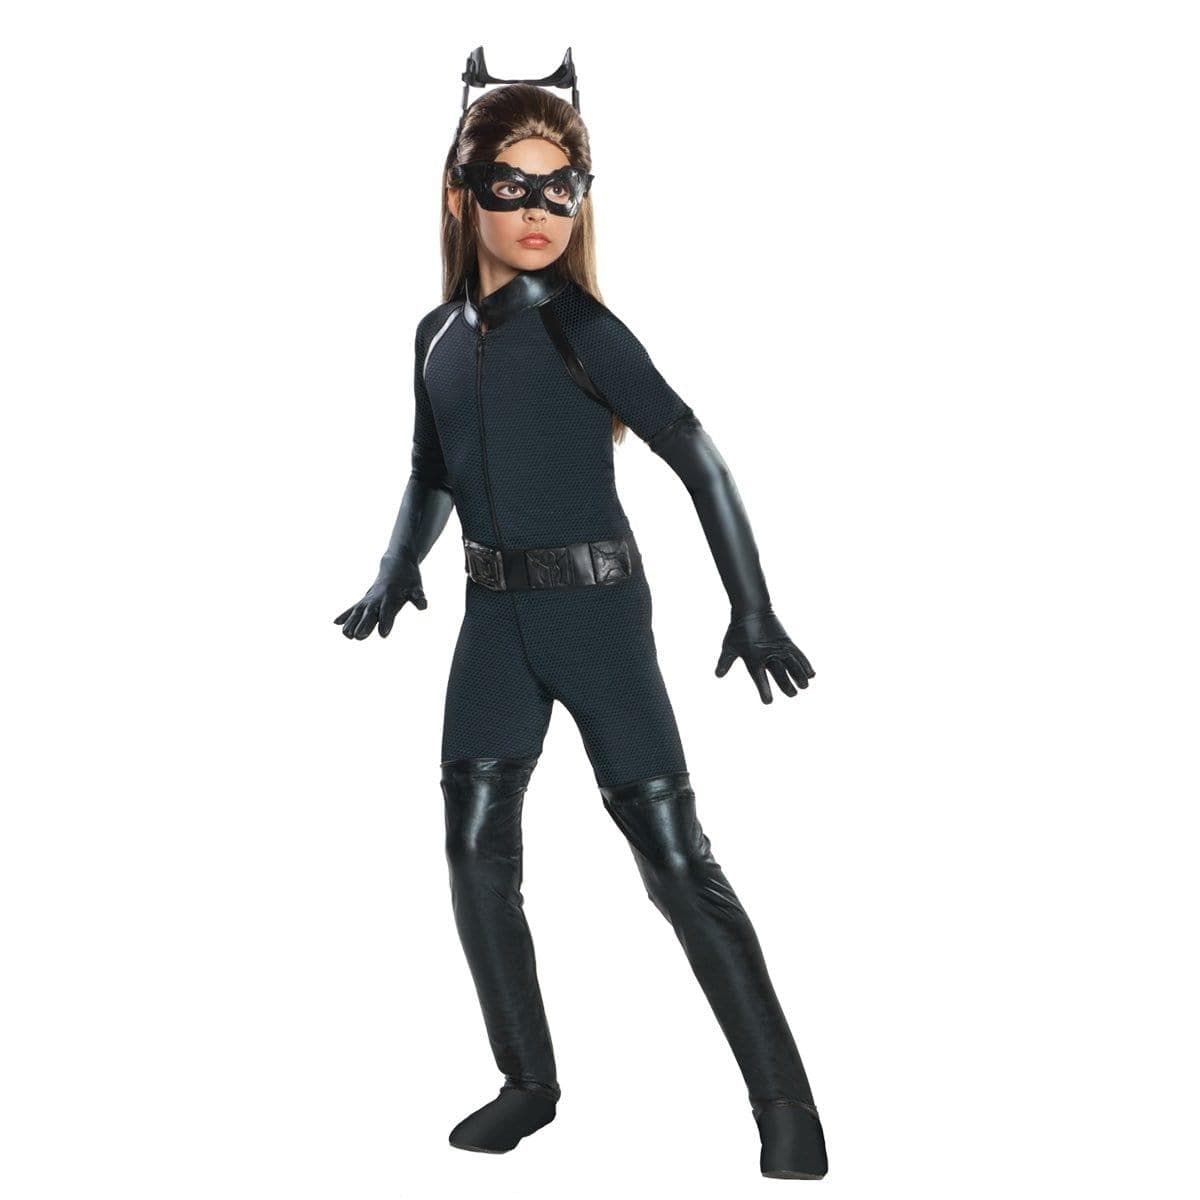 Buy Costumes Catwoman Deluxe Costume for Kids, Batman sold at Party Expert